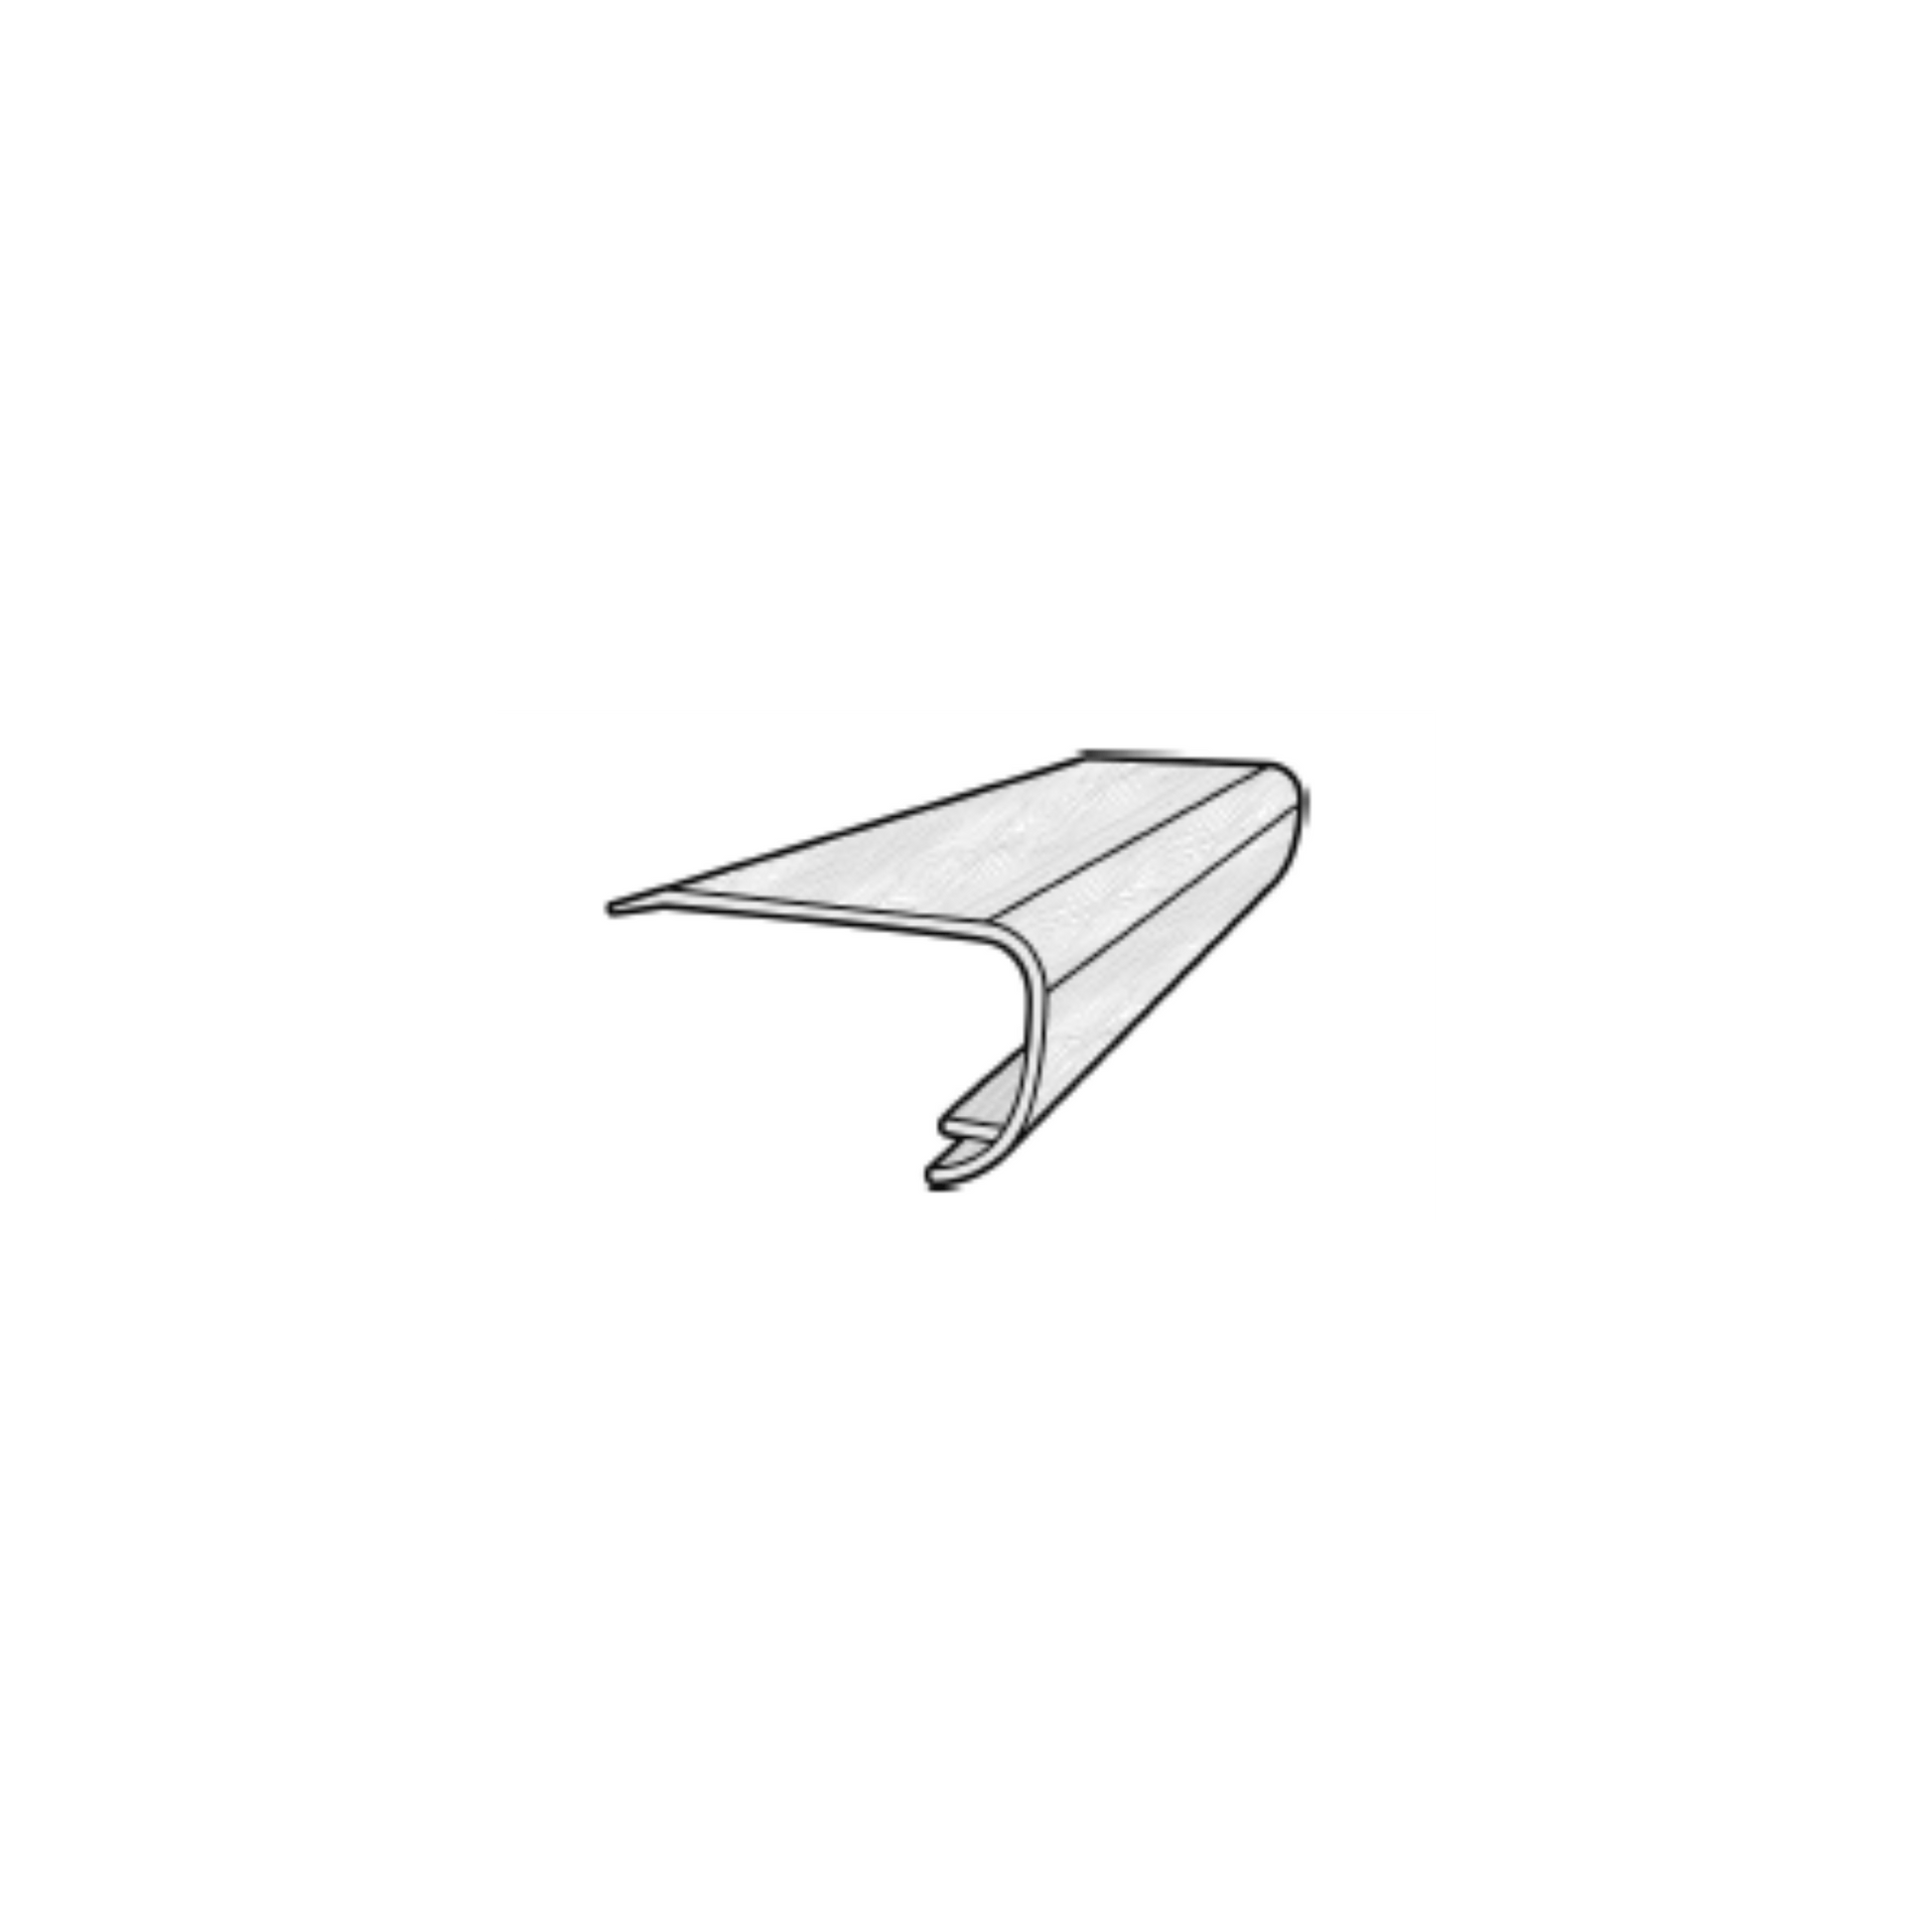 Accessory MSI - Cyrus - Braly - Overlap Stair Nose MSI